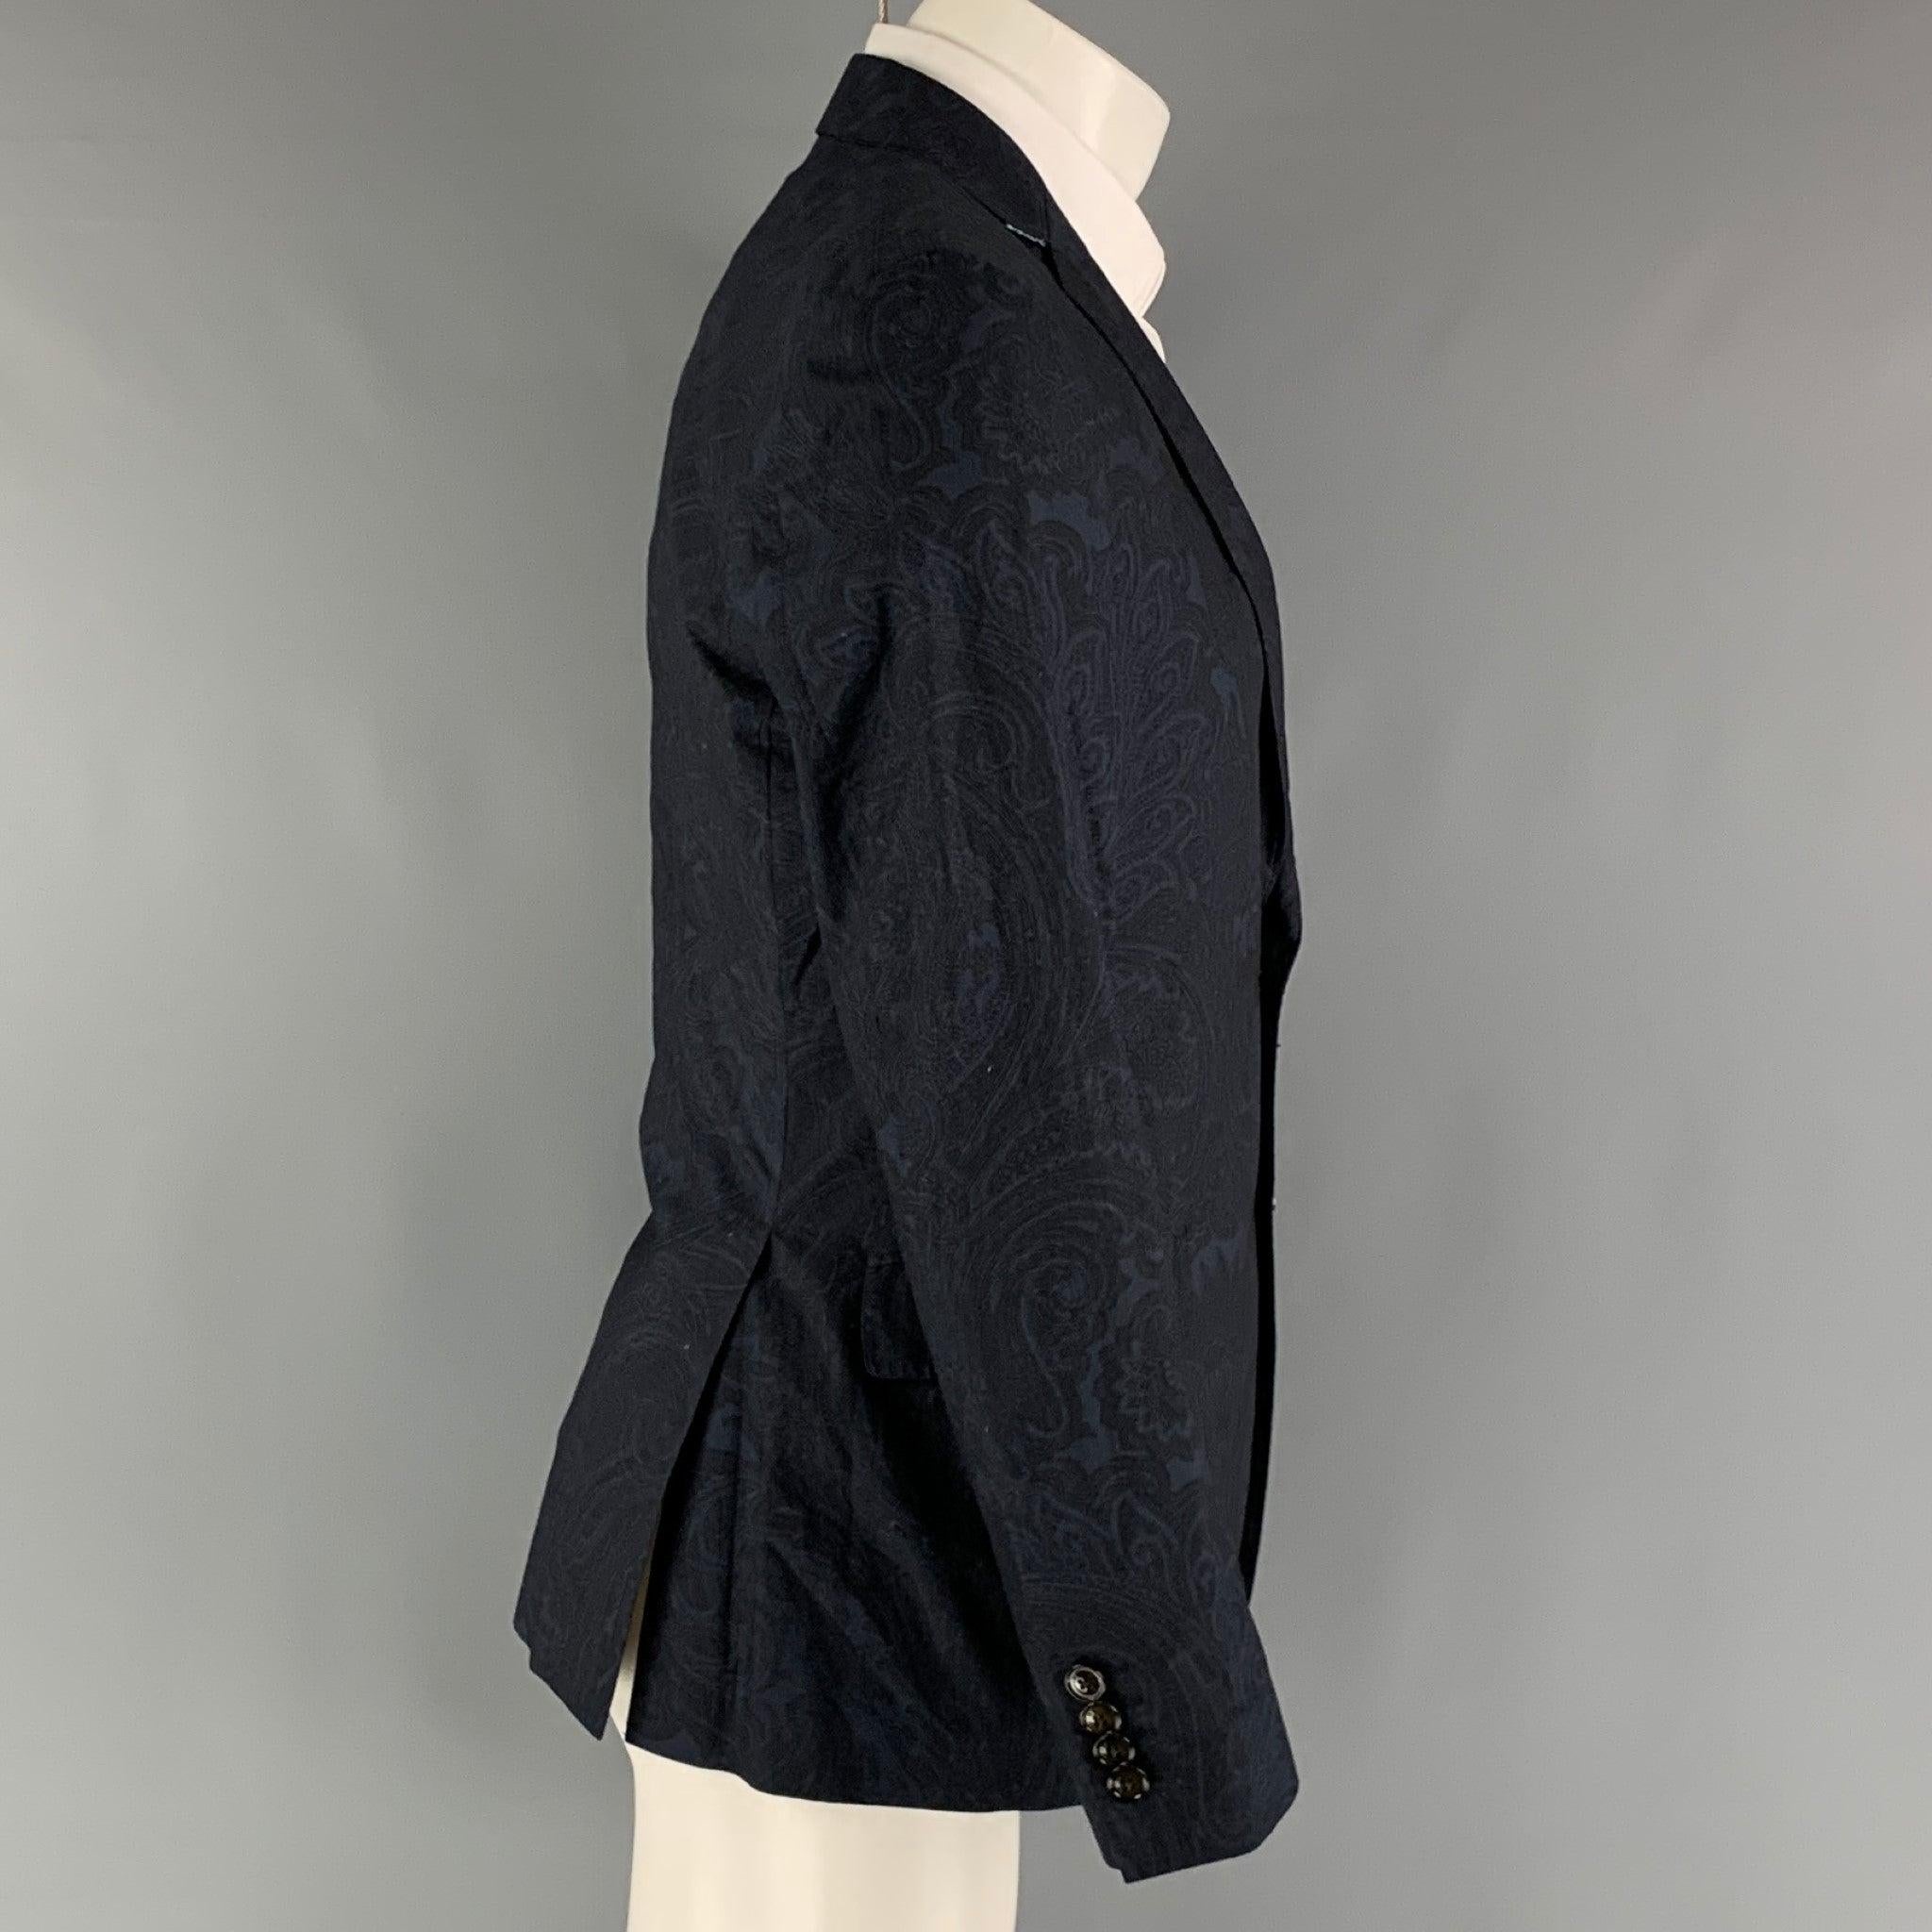 ETRO sport coat comes in a navy paisley cotton woven material with a full liner featuring a notch lapel, flap pockets, double back vent, and a two button closure. Made in Italy.Excellent Pre-Owned Condition. 

Marked:   IT 48 

Measurements: 
